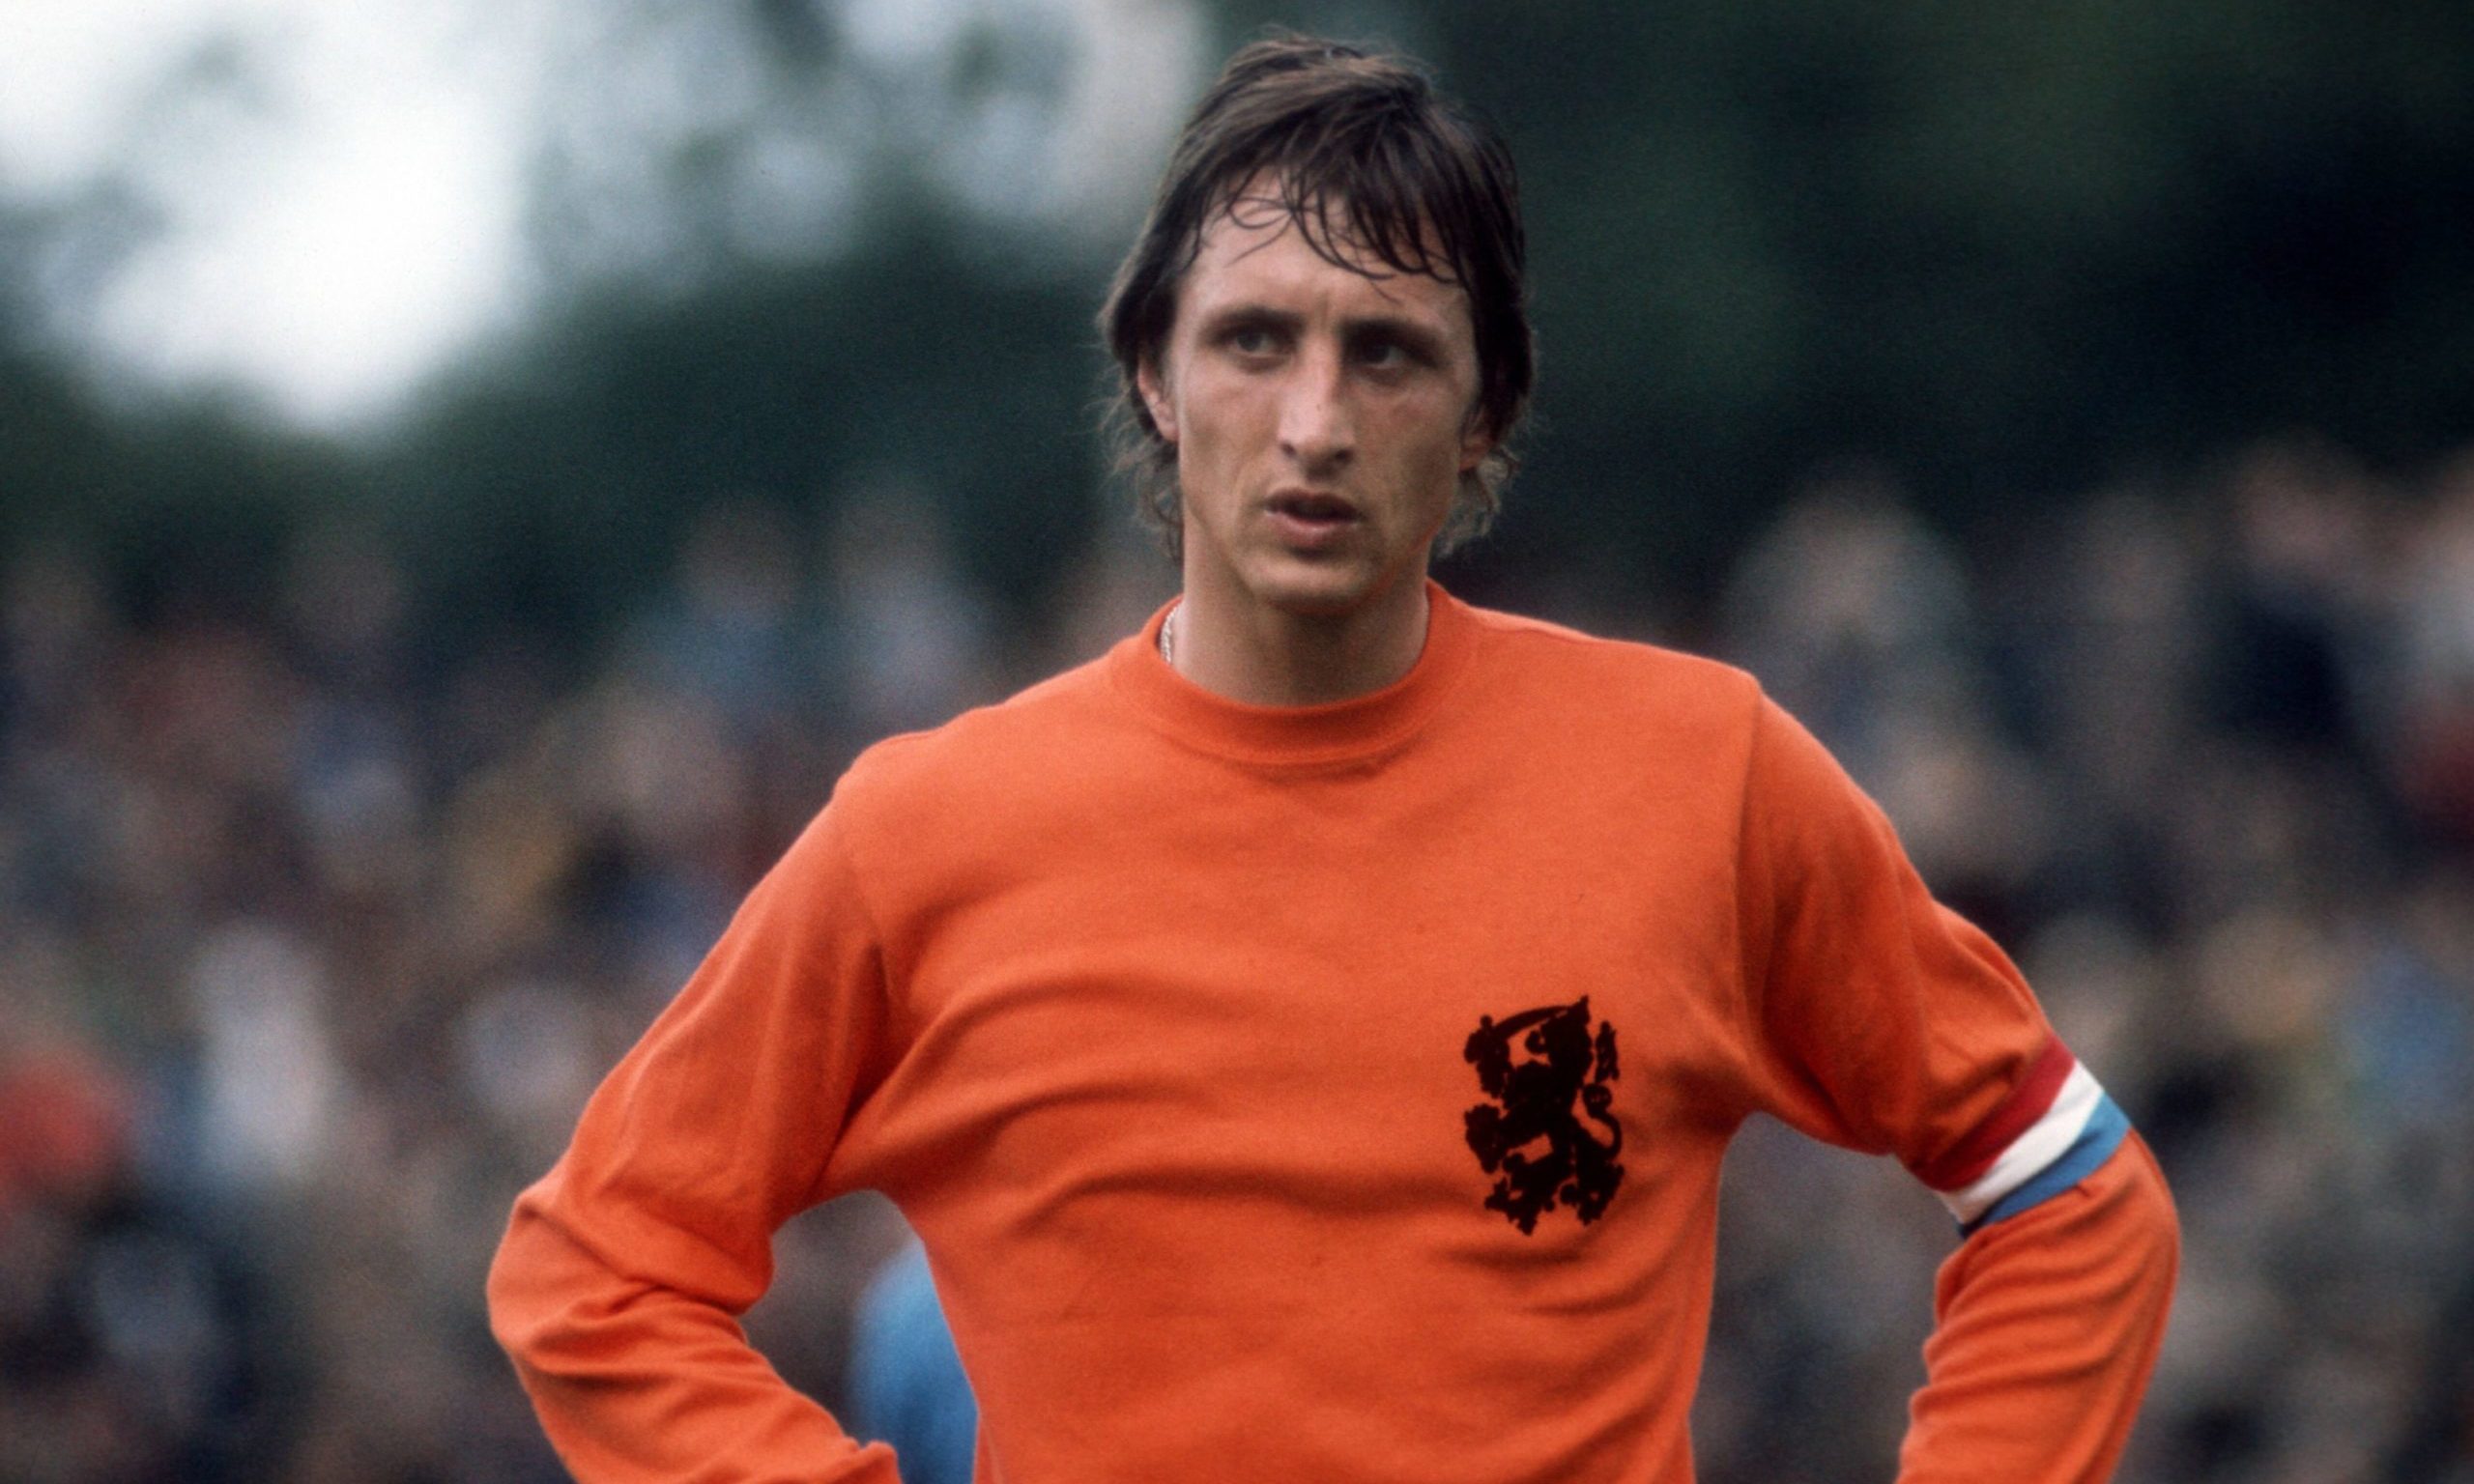 From Barcelona to Boghead: Johan Cruyff almost played in Scotland in 1980